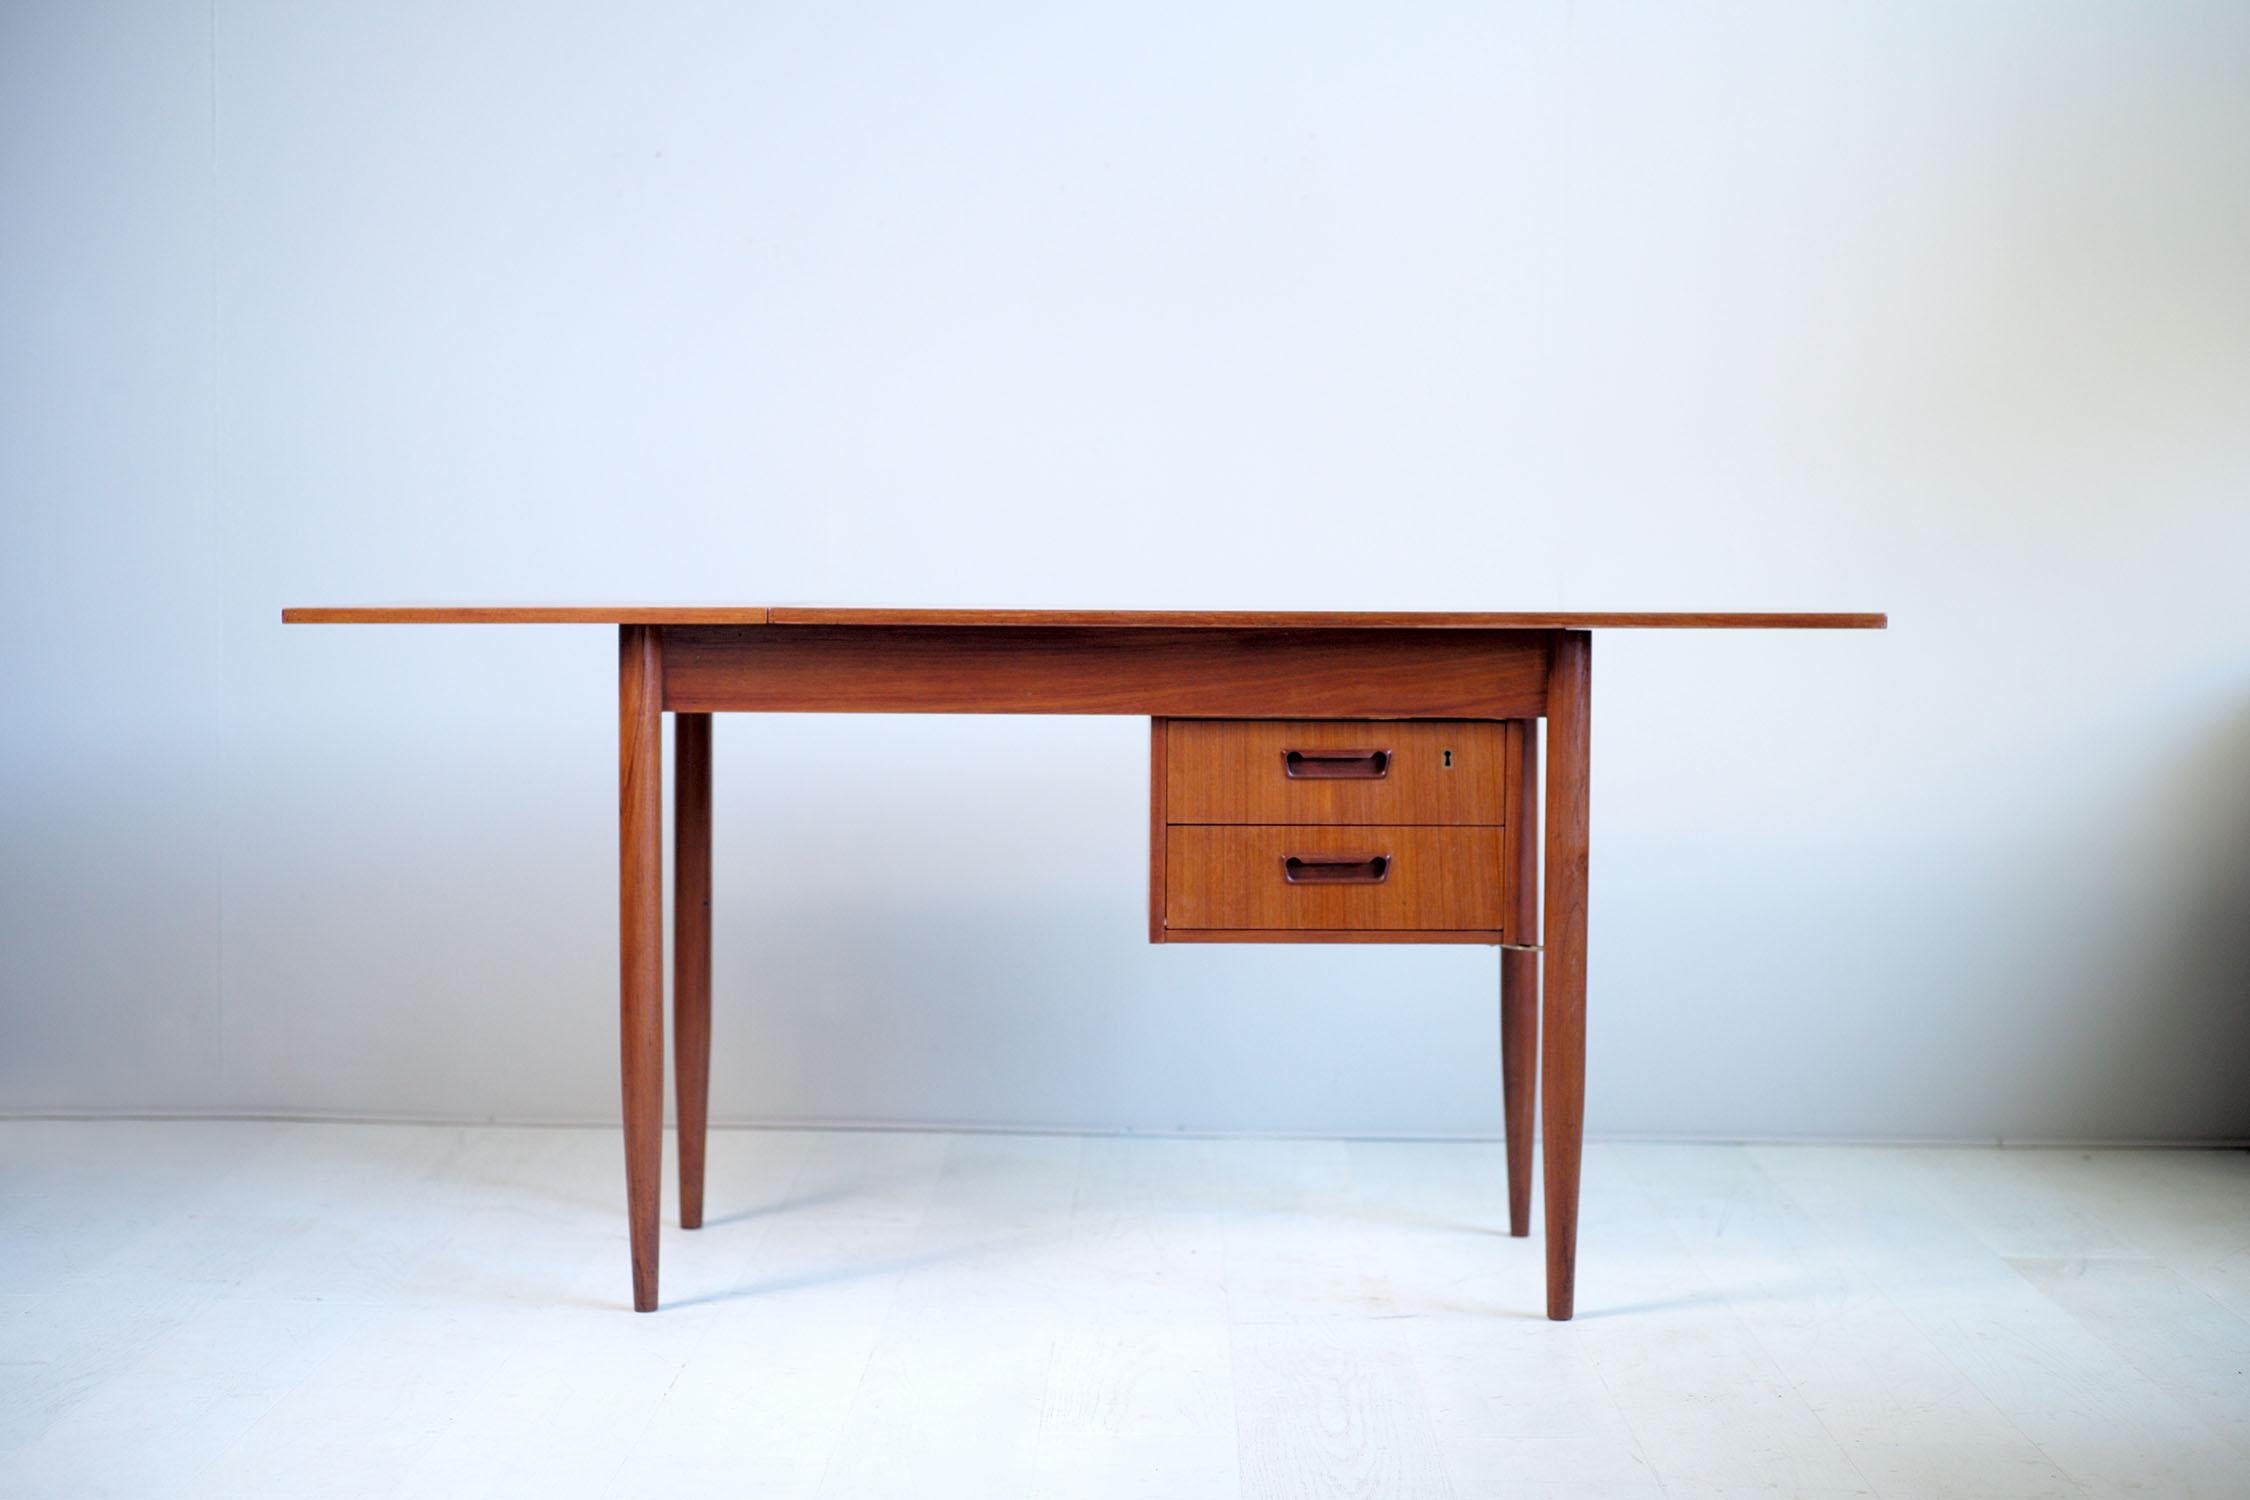 Gunnar Nielsen Tibergaard teak system desk, Denmark, 1960. The two-part articulated tray slides, the length goes from 115 com to 165cm. The double drawer box can be placed on the right or on the left, fixed by two golden brass tie rods. Marked with